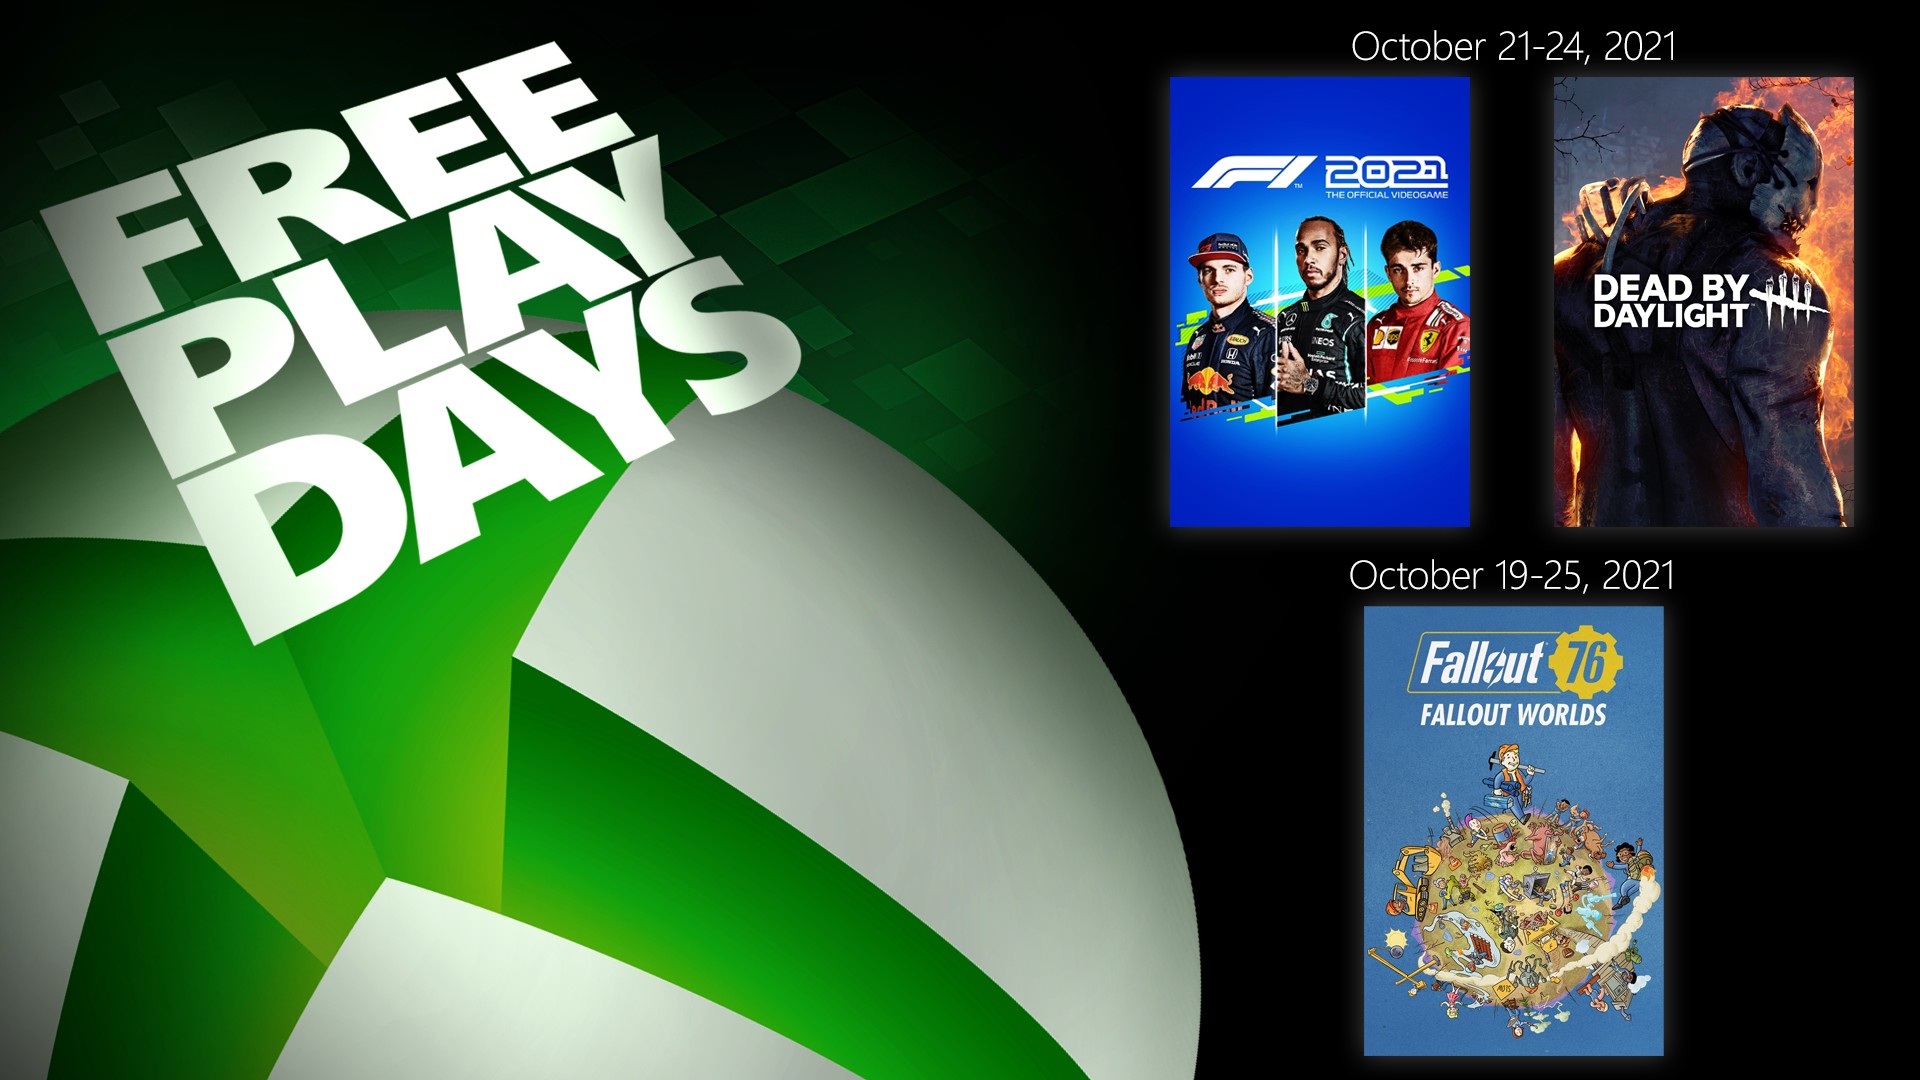 Free Play Days - October 21